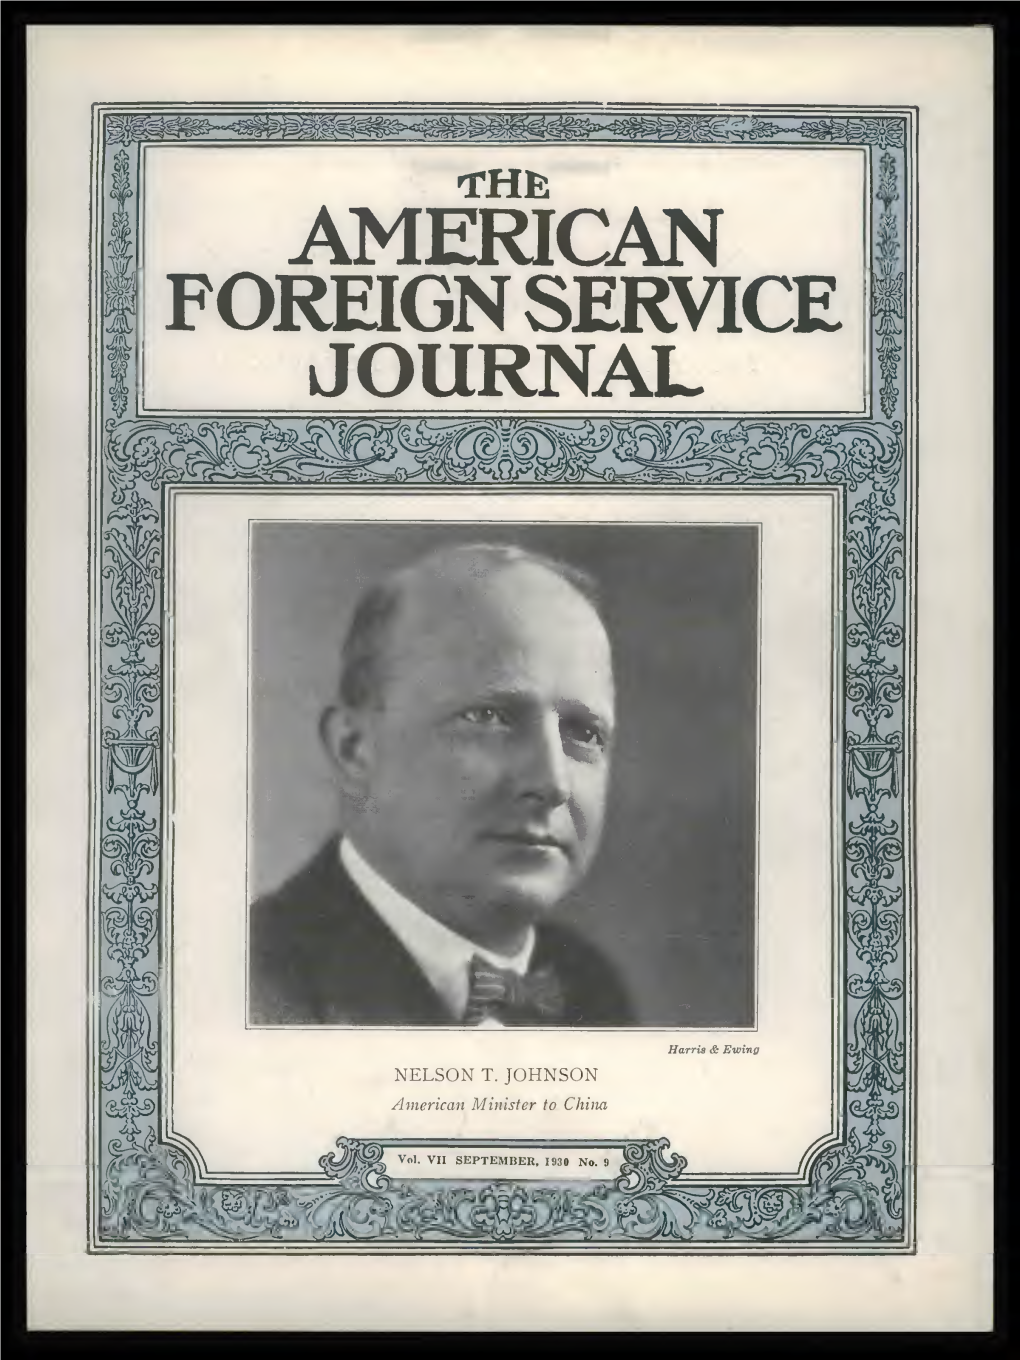 The Foreign Service Journal, September 1930